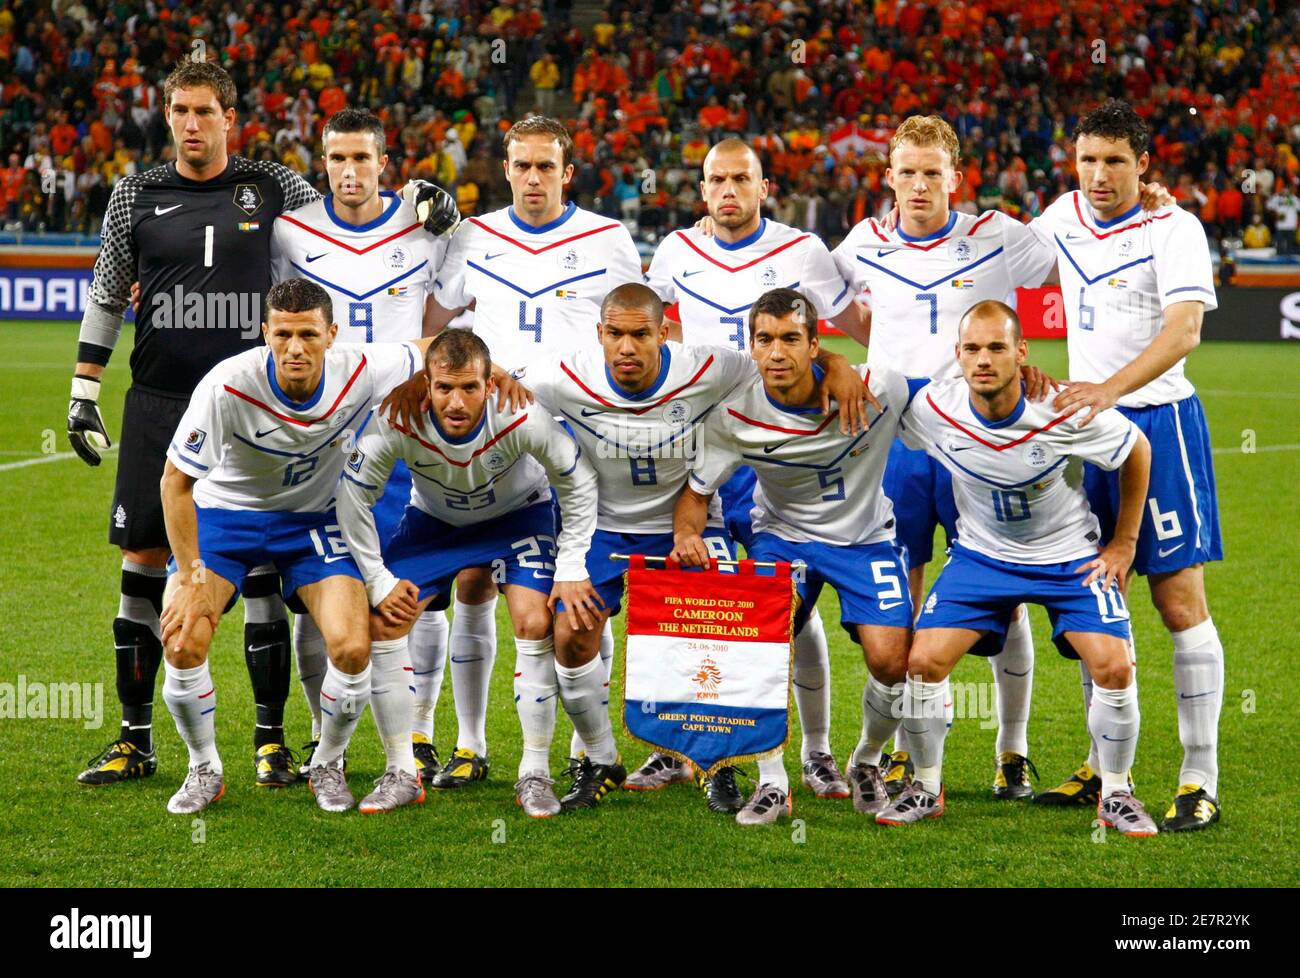 The Netherlands soccer team poses for a picture before the start of their  2010 World Cup Group E soccer match against Cameroon at Green Point stadium  in Cape Town June 24, 2010.